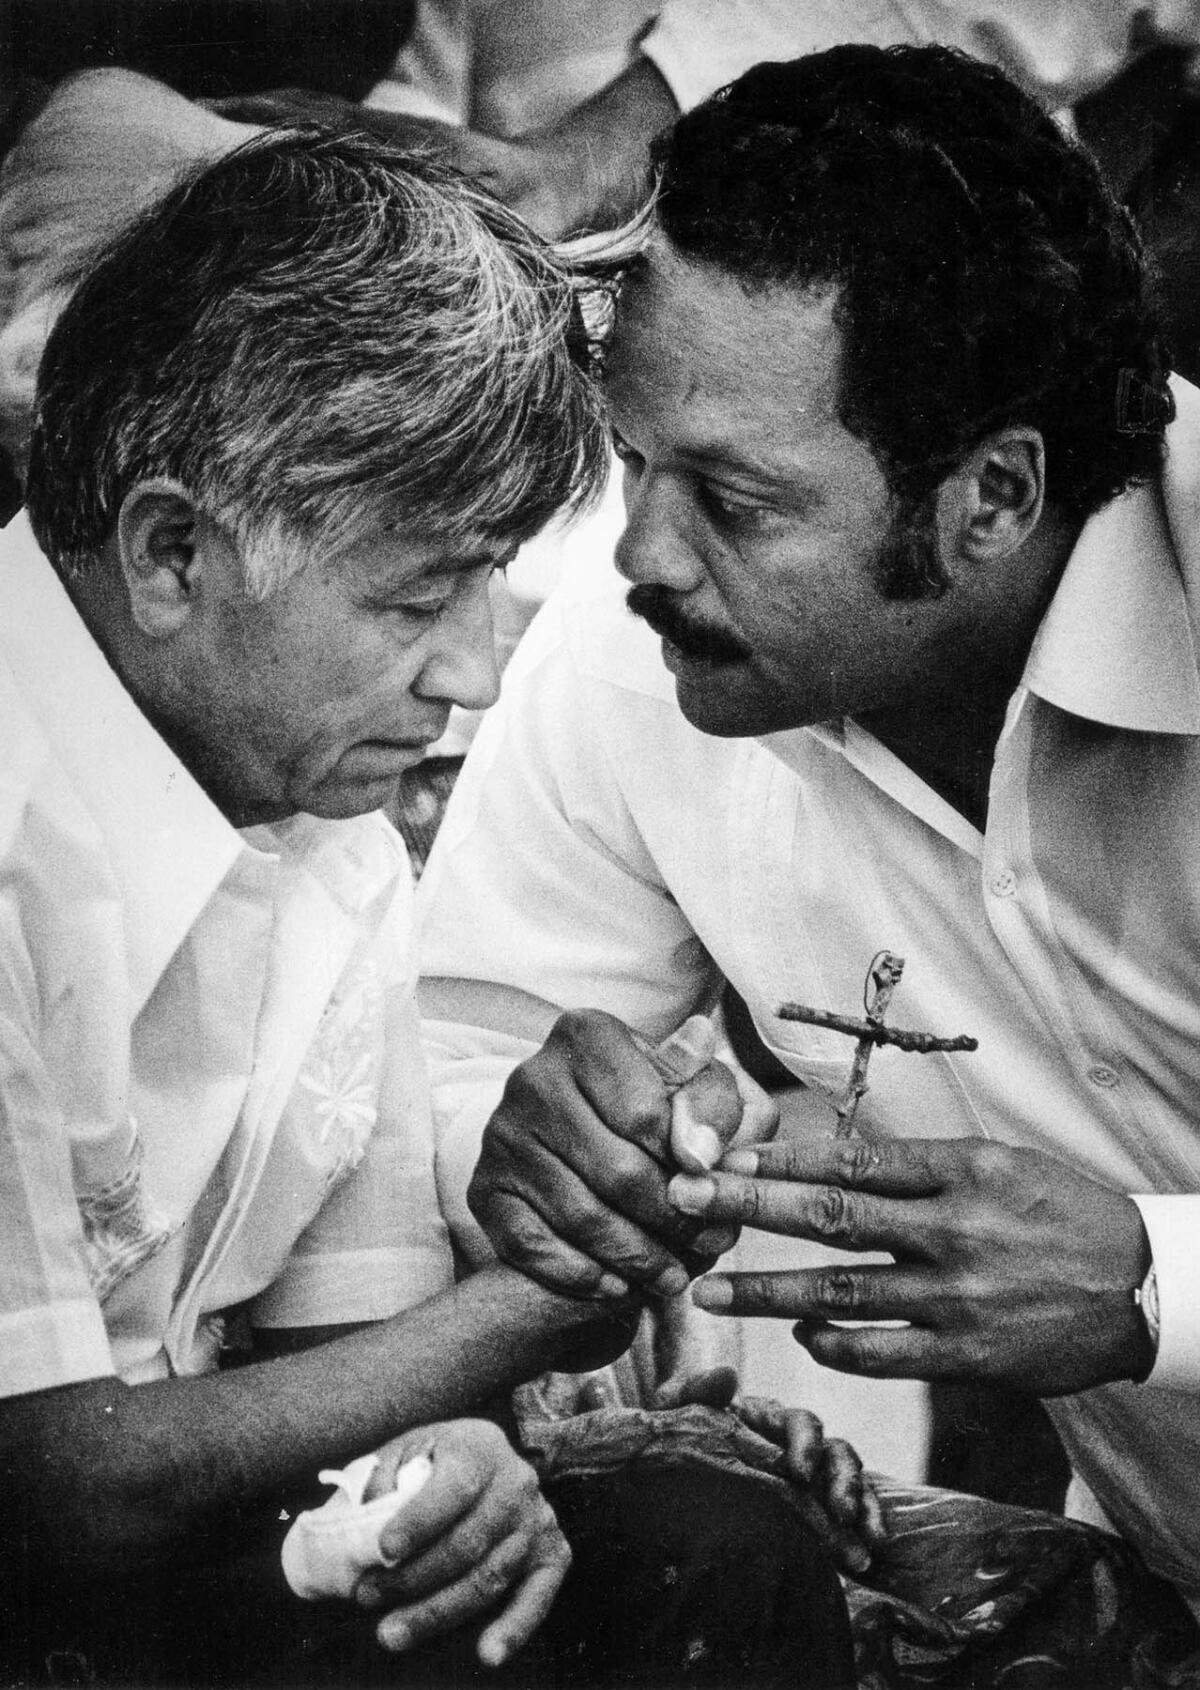 Aug. 21, 1988: Chavez passes a wooden cross to Jesse Jackson during a Mass to end the union leader's 36-day fast protesting use of pesticides on table grapes. This image was published in the Aug. 22, 1988, Los Angeles Times.